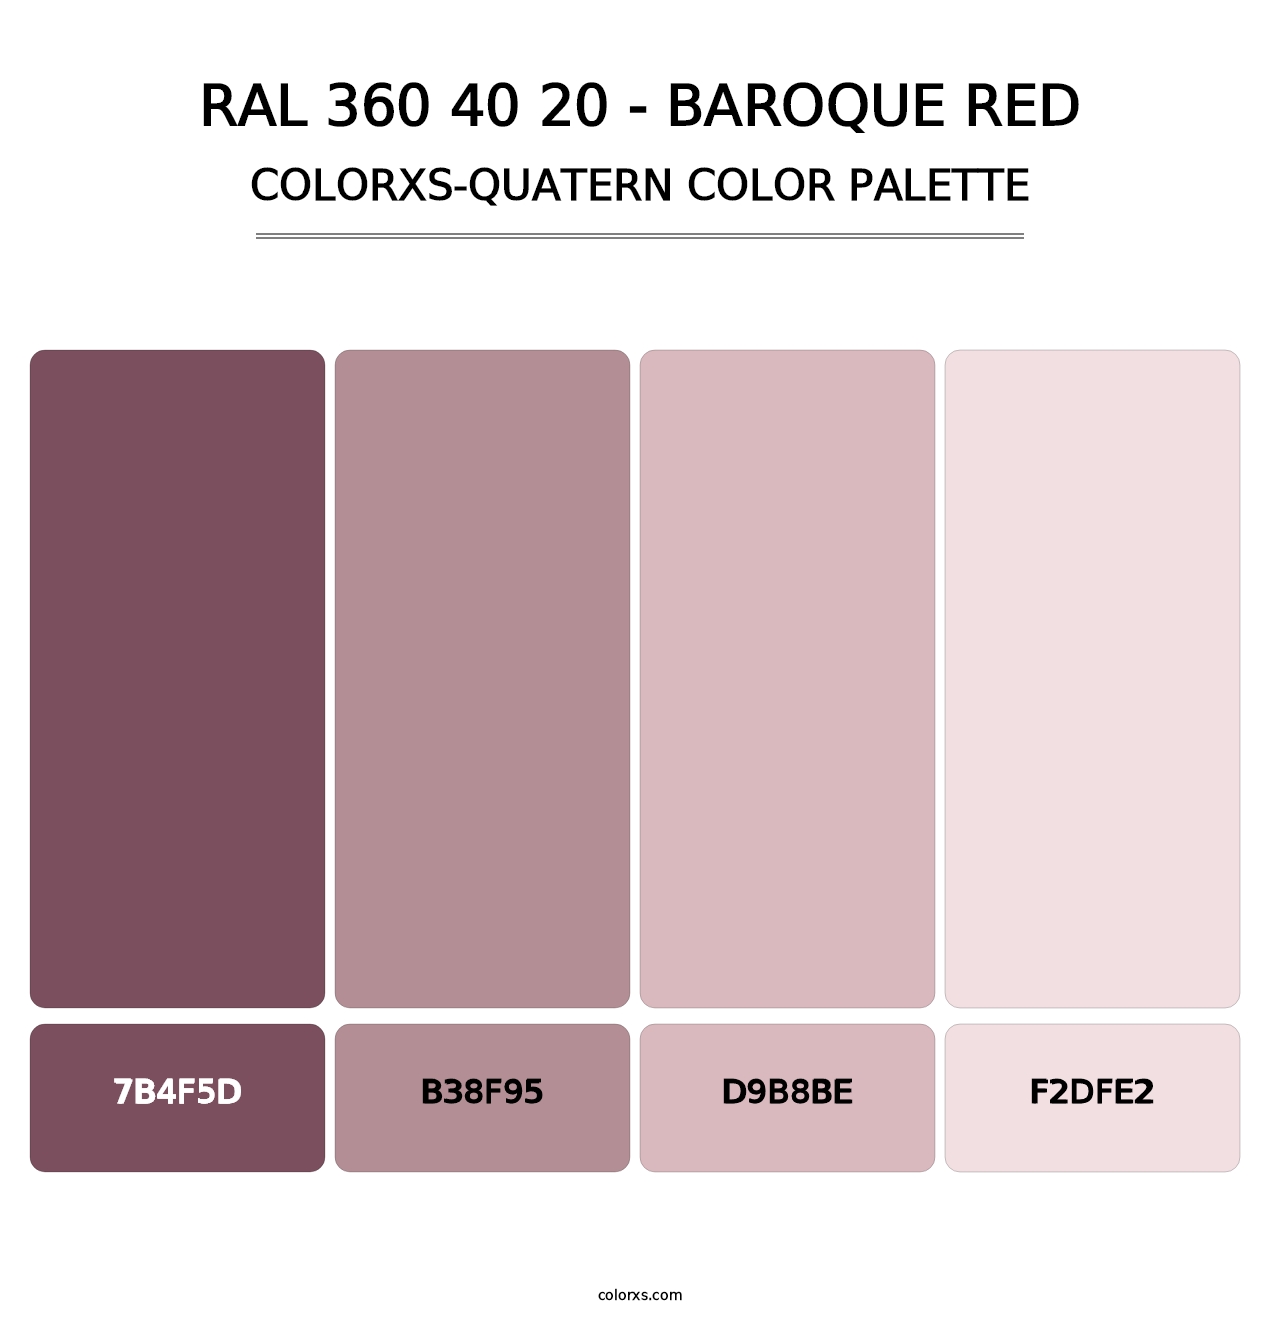 RAL 360 40 20 - Baroque Red - Colorxs Quatern Palette